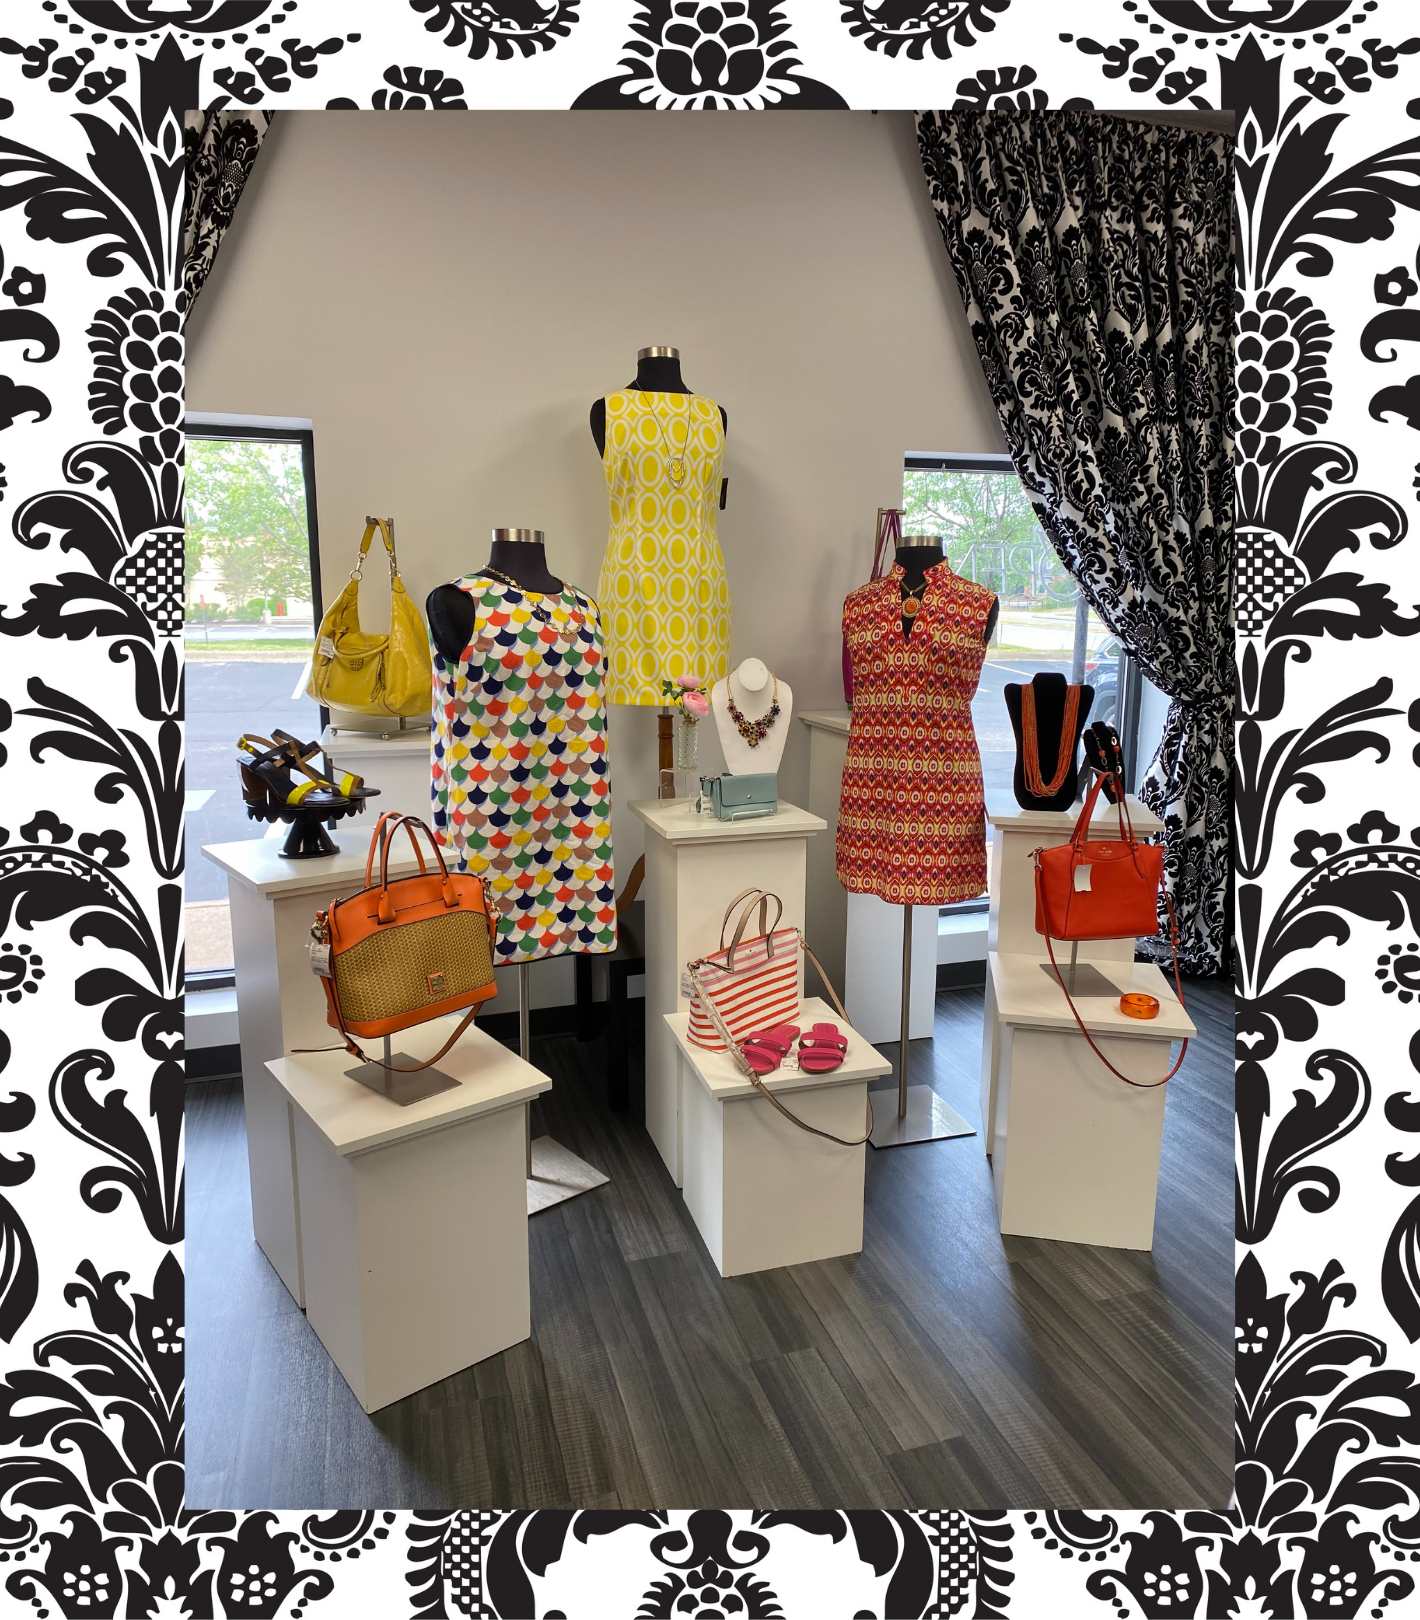 Fit For A Queen is a fashion consignment boutique in Richmond, VA dedicated exclusively to curvy women (sizes 14+)! consign with us